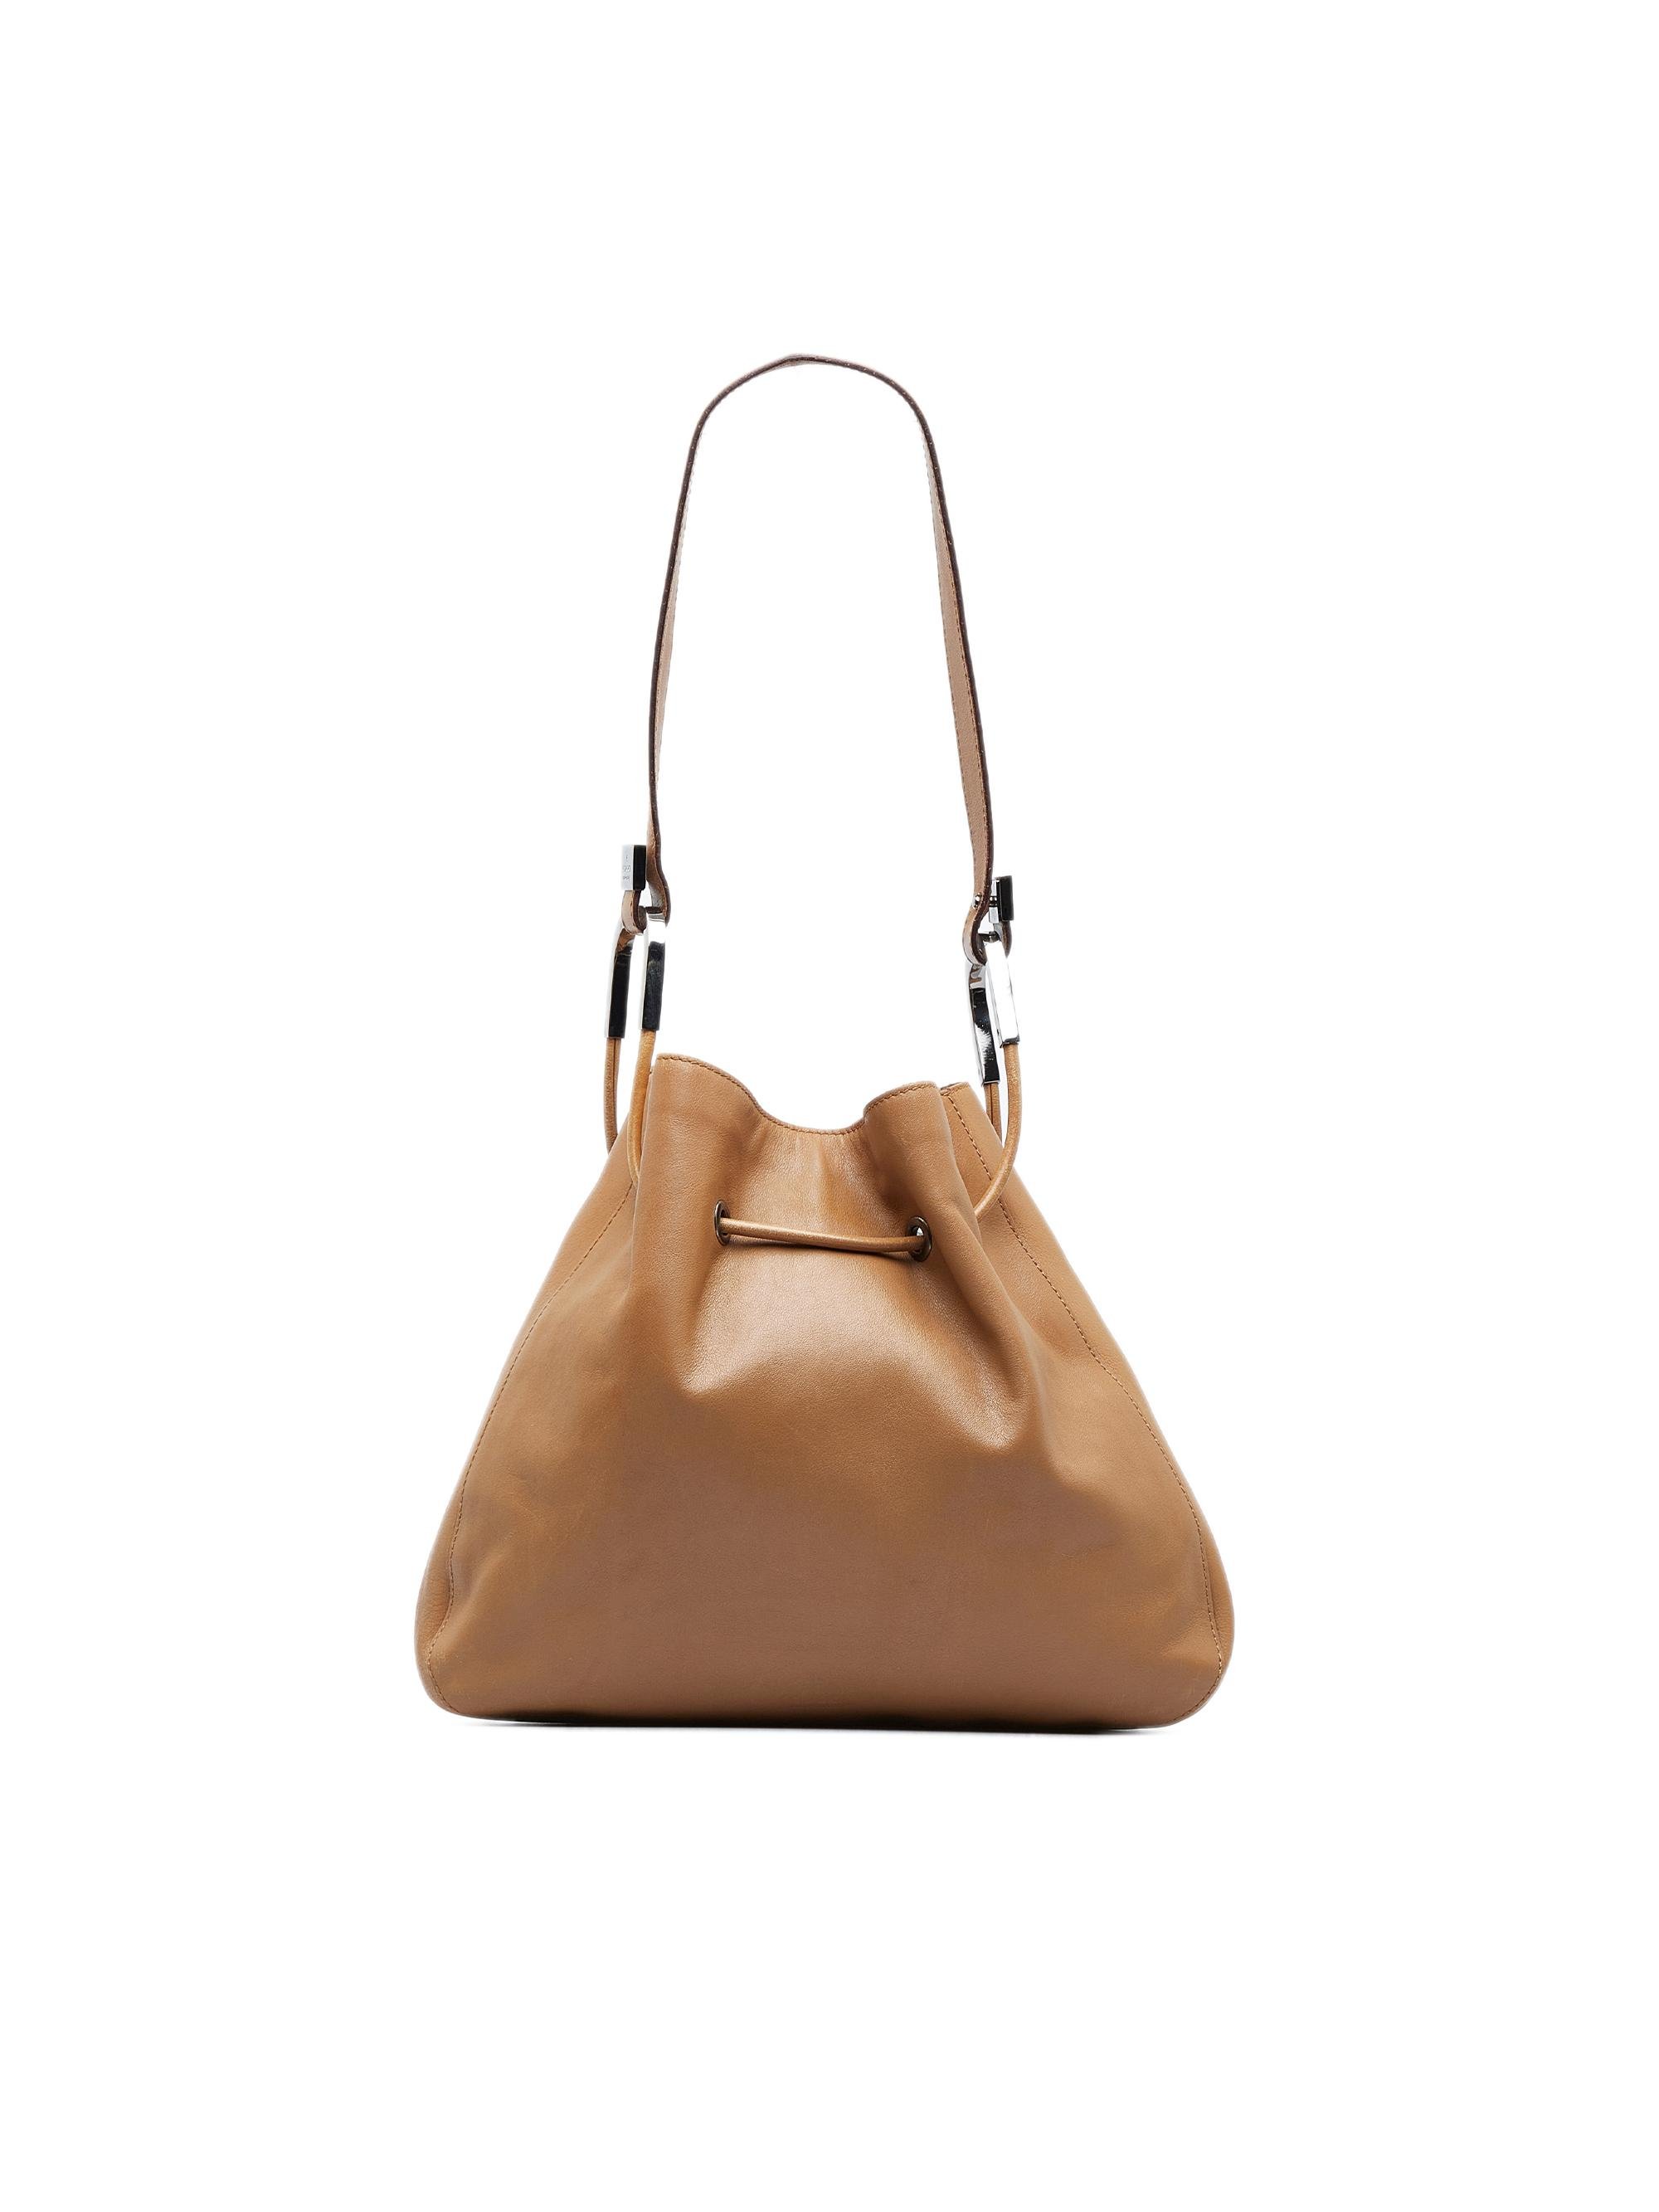 Gucci 100% Calf Leather Brown Leather Bucket Bag One Size - 64% off